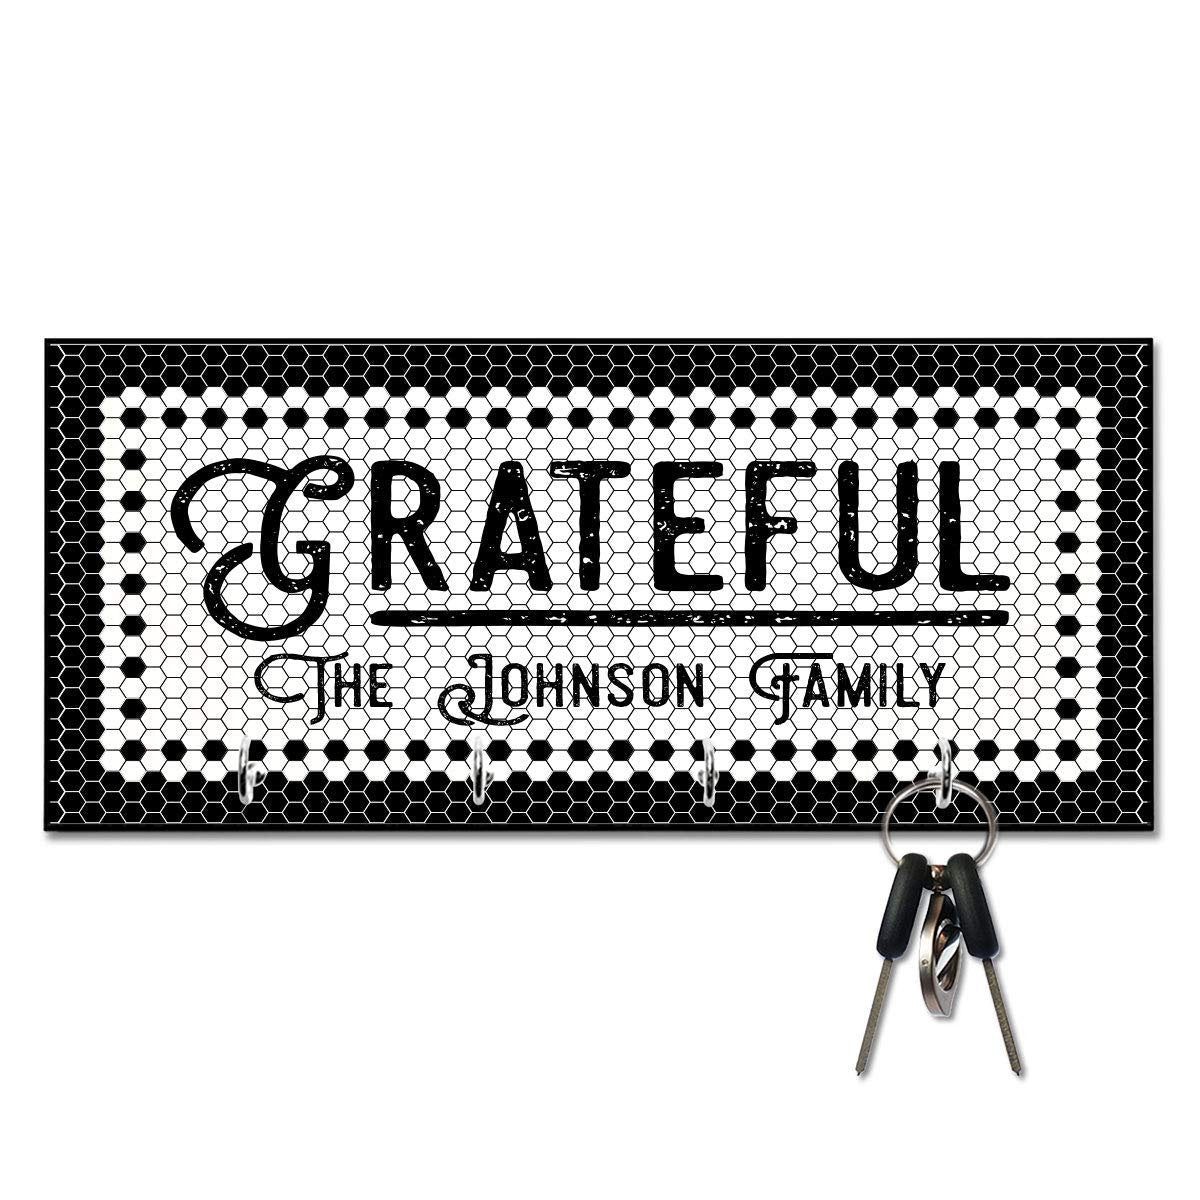 Personallized Black and White Tile Look Look - Gratetful - Key Hanger